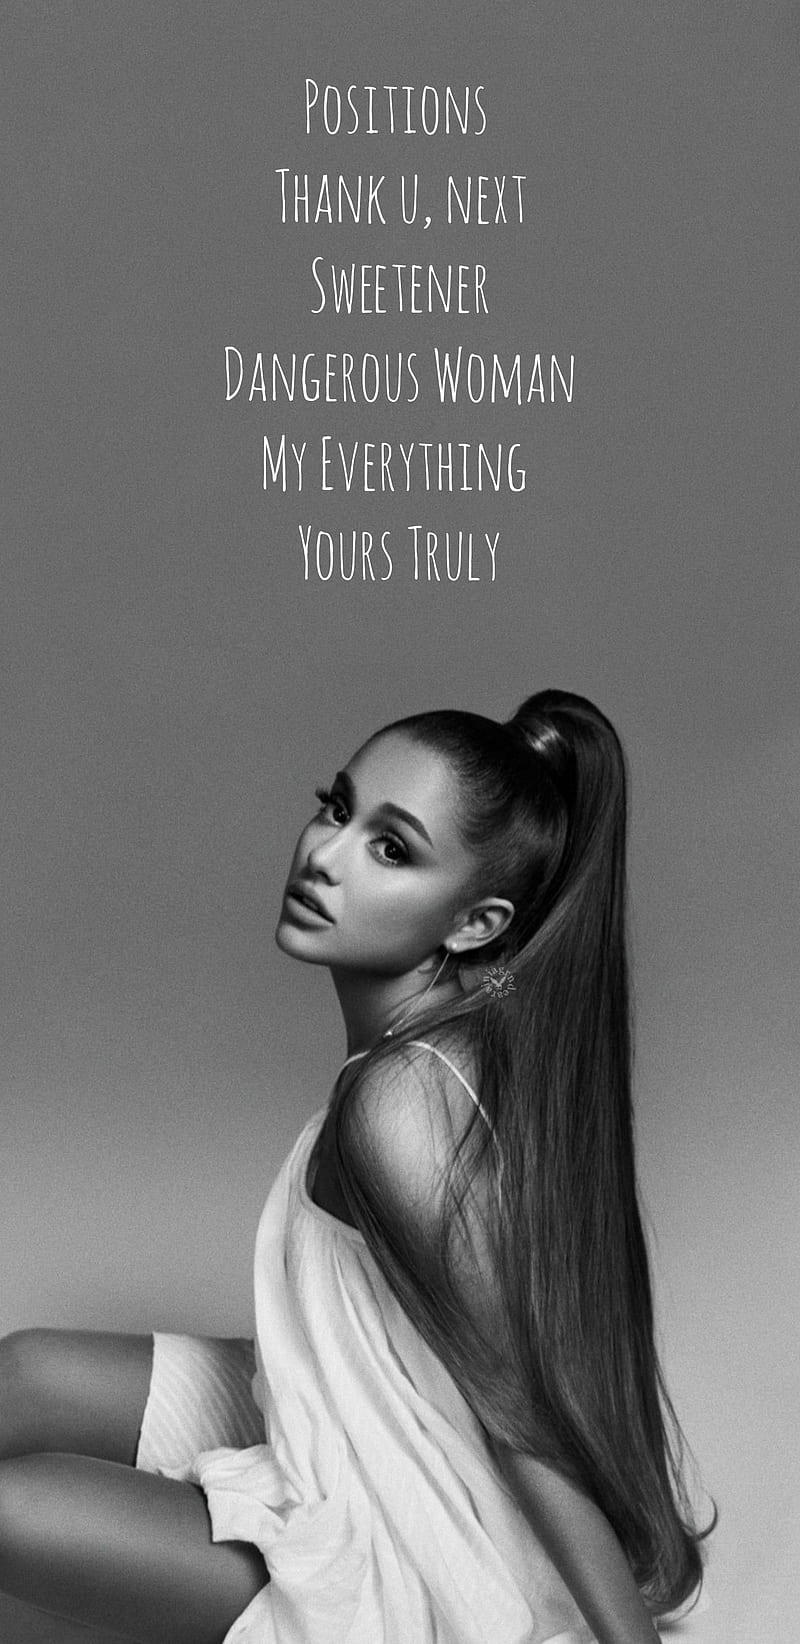 Ariana Grande, dangerous woman, my everything, positions, sweetener, thank u next, yours truly, HD phone wallpaper